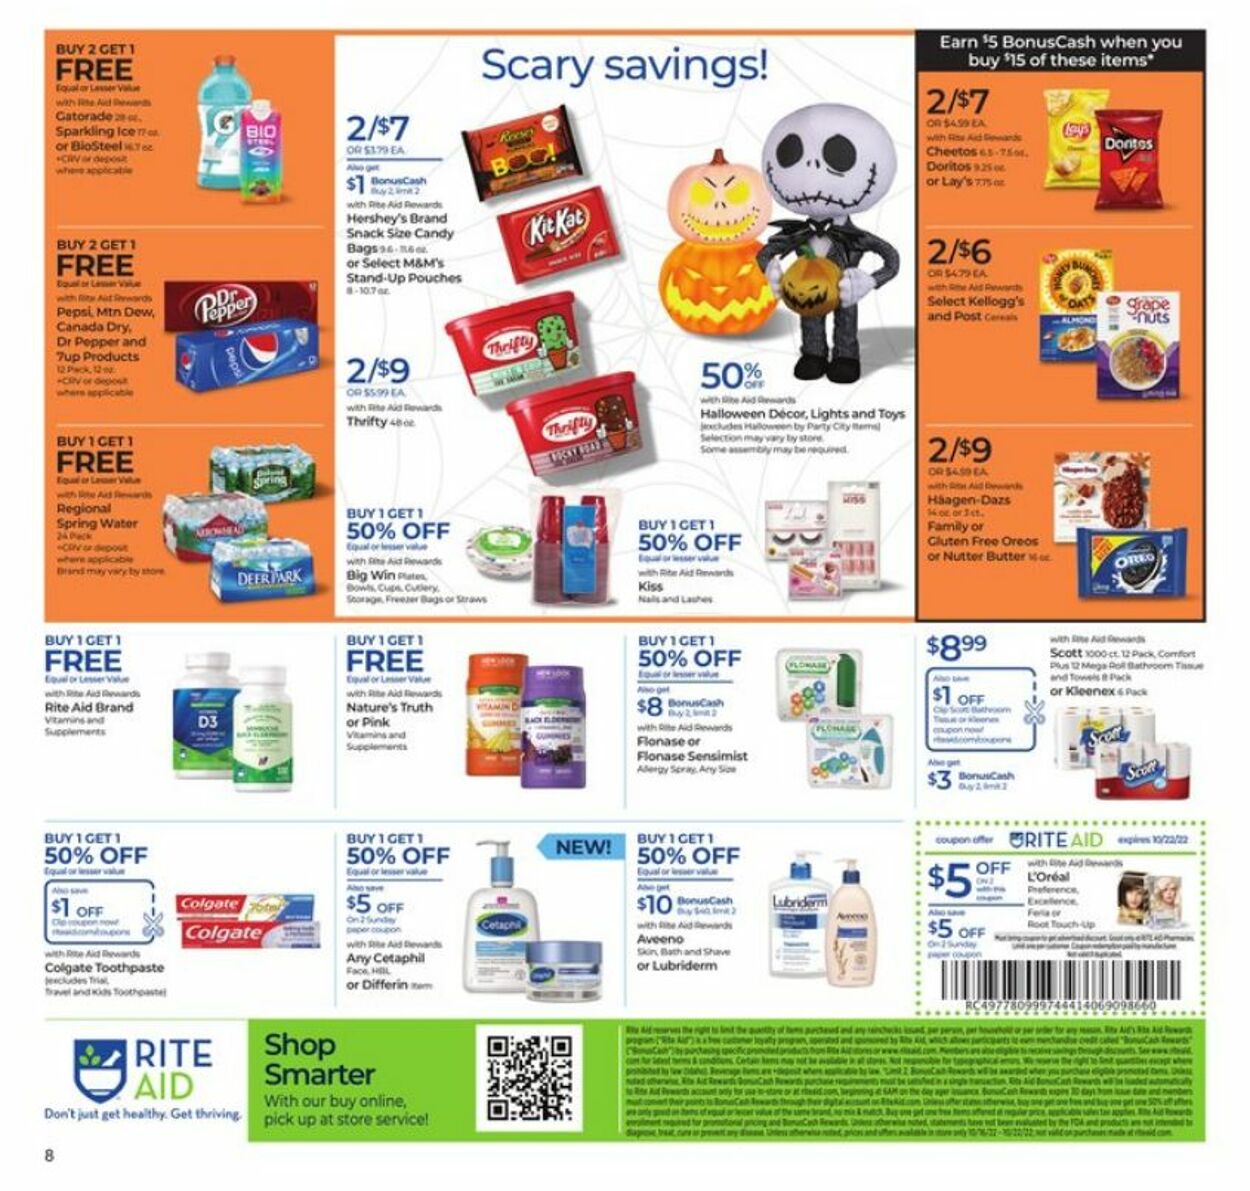 Weekly ad Rite Aid 10/16/2022 - 10/22/2022